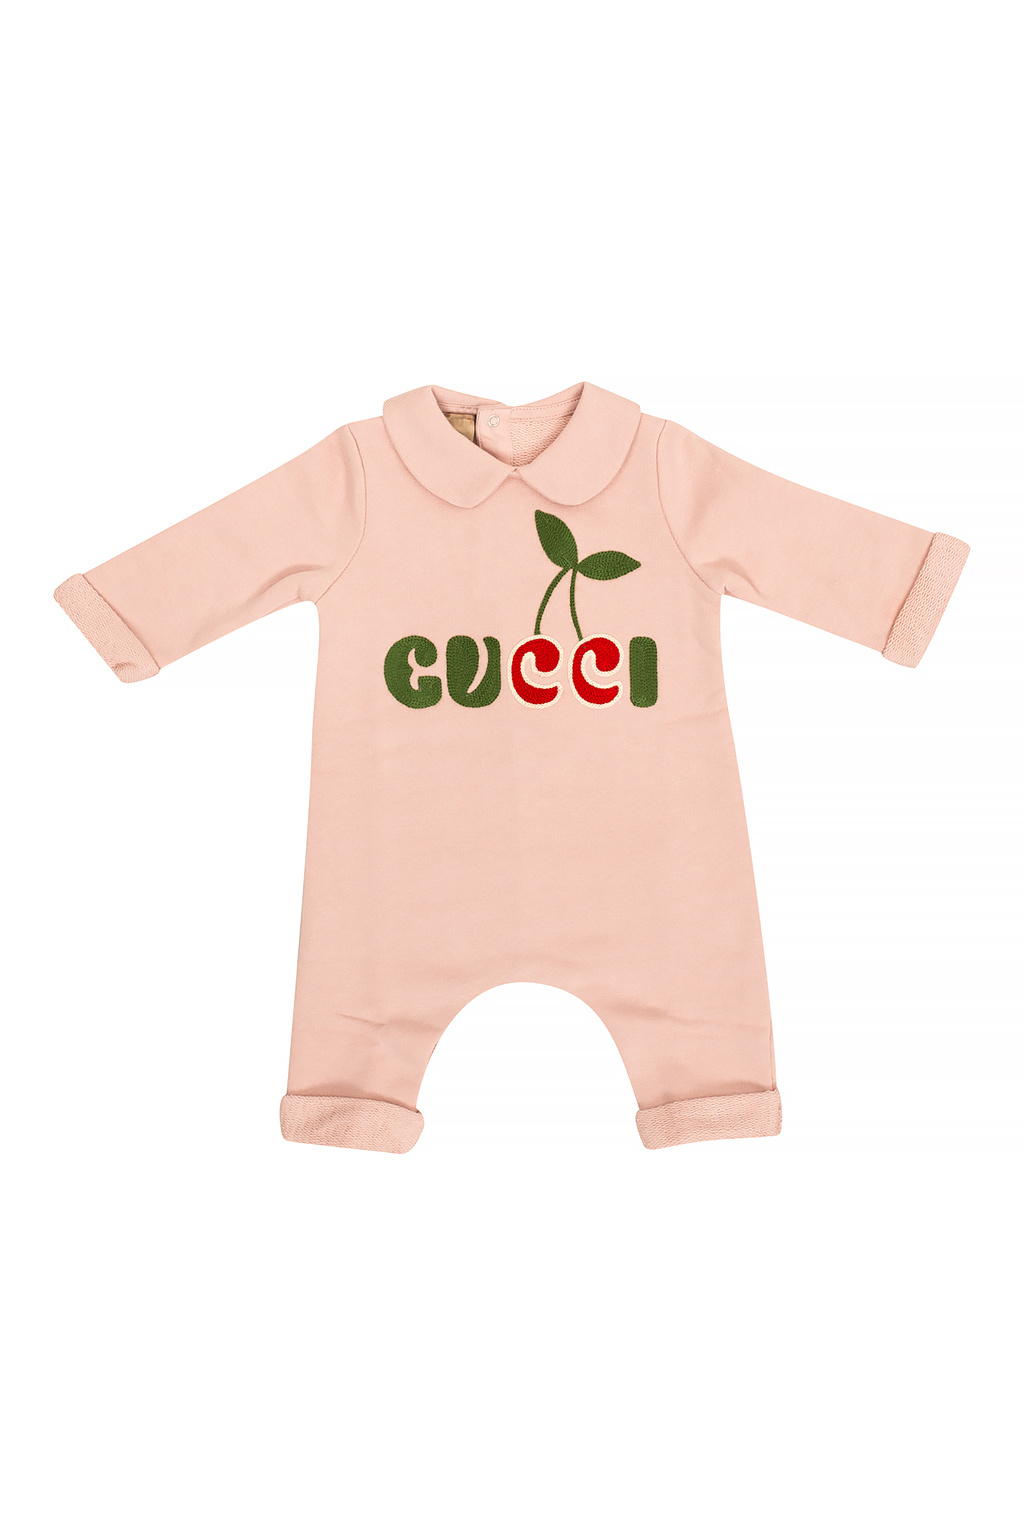 Gucci Kids Clothing for Baby Girls